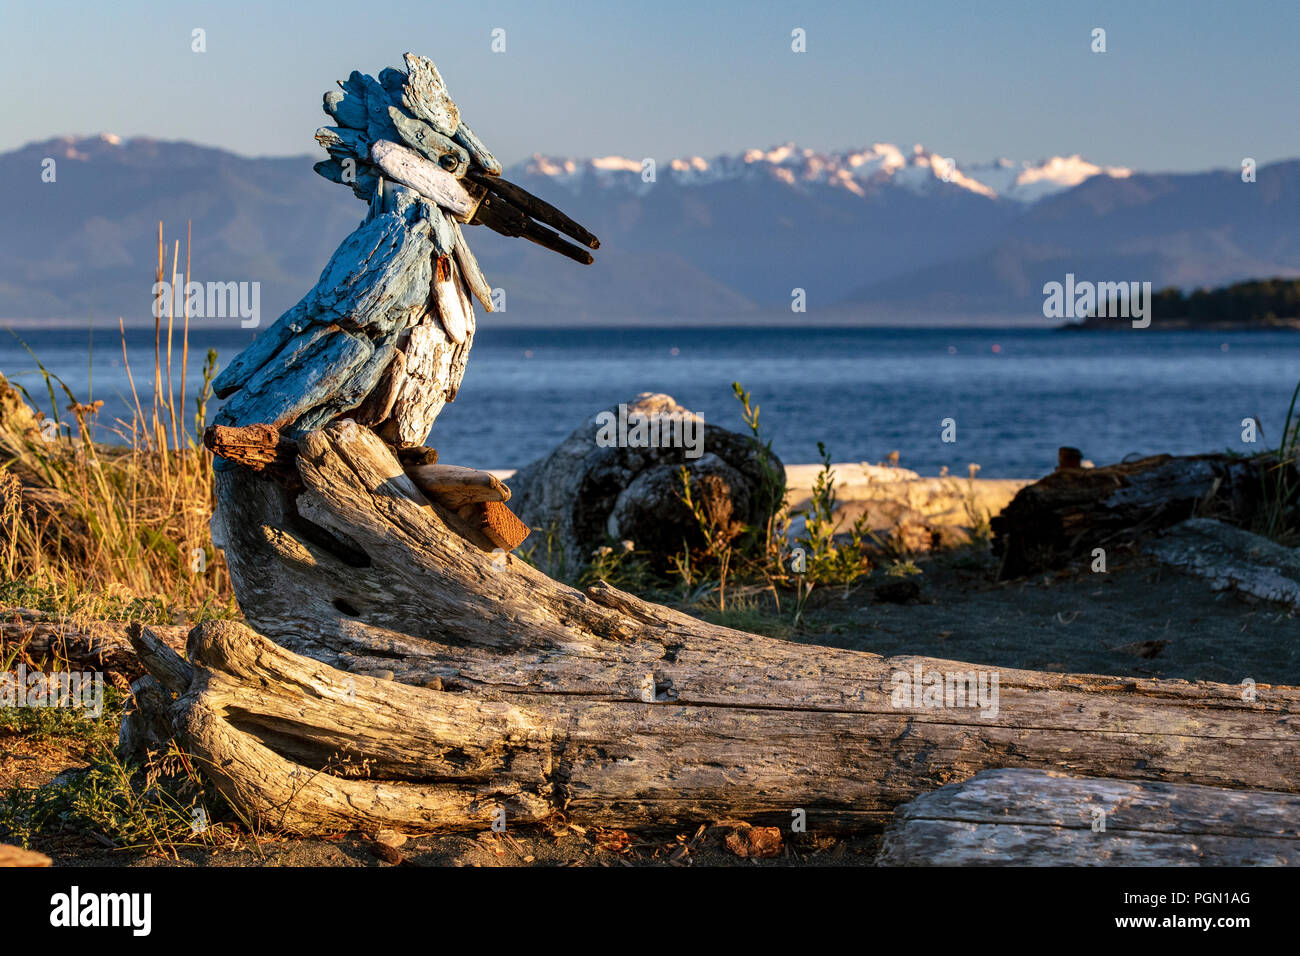 Belted Kingfisher - Driftwood Art by Paul Lewis - Esquimalt Lagoon, Victoria, Vancouver Island, British Columbia, Canada Stock Photo